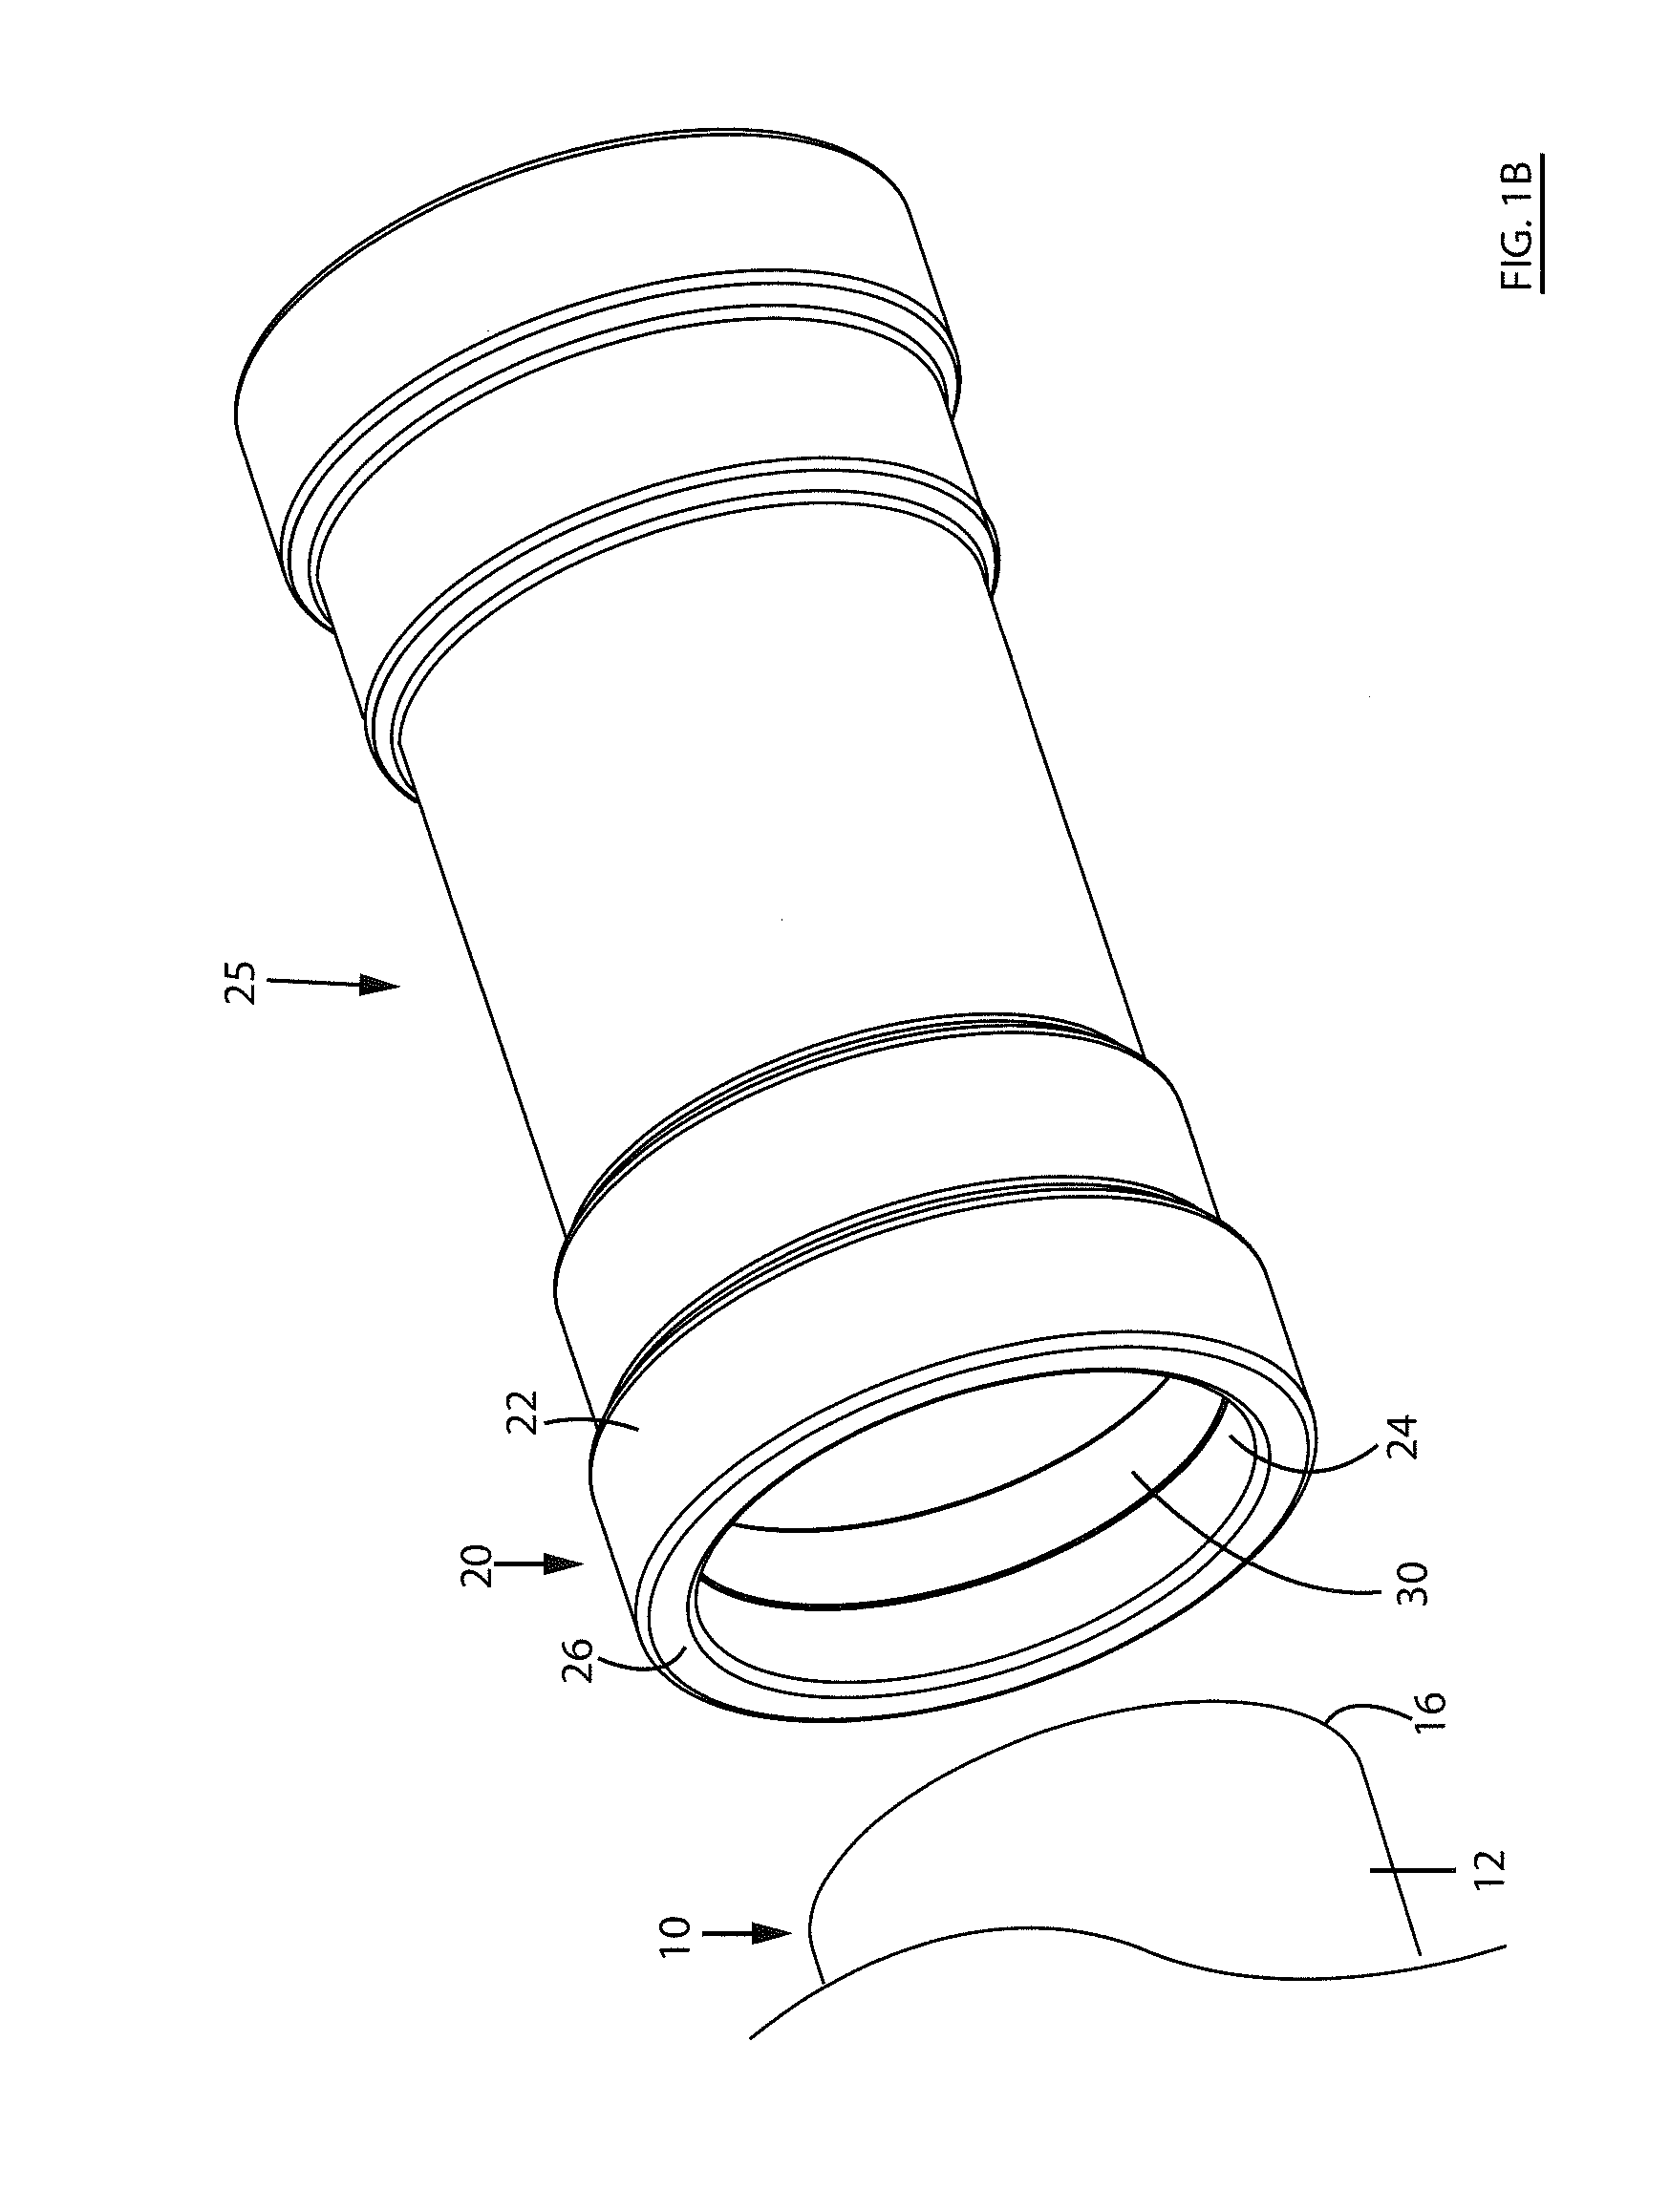 Method of joining pipes and fittings